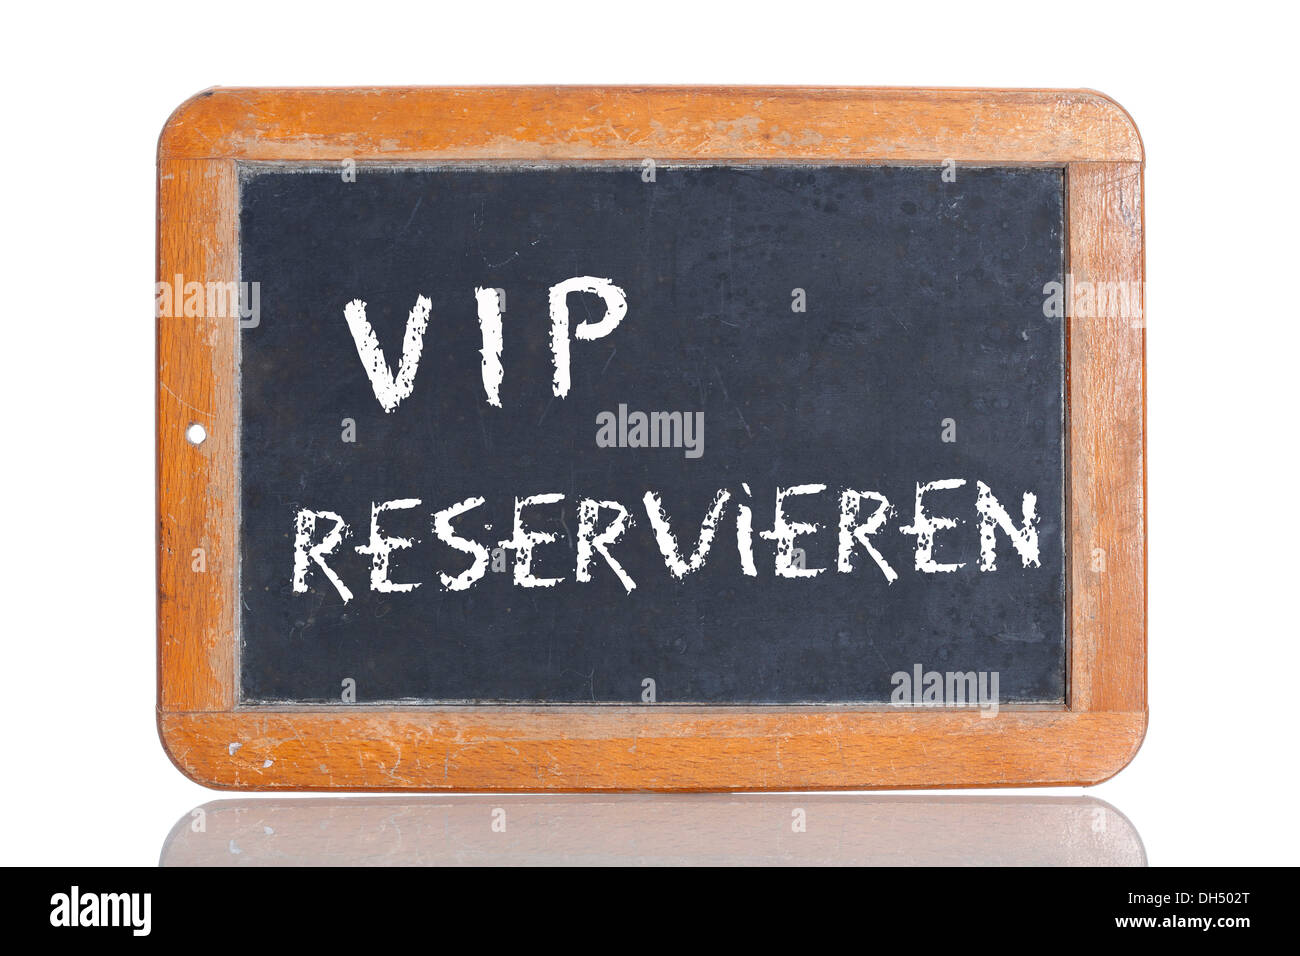 Old chalkboard, lettering 'VIP RESERVIEREN', German for 'BOOK VIP SEATS' Stock Photo